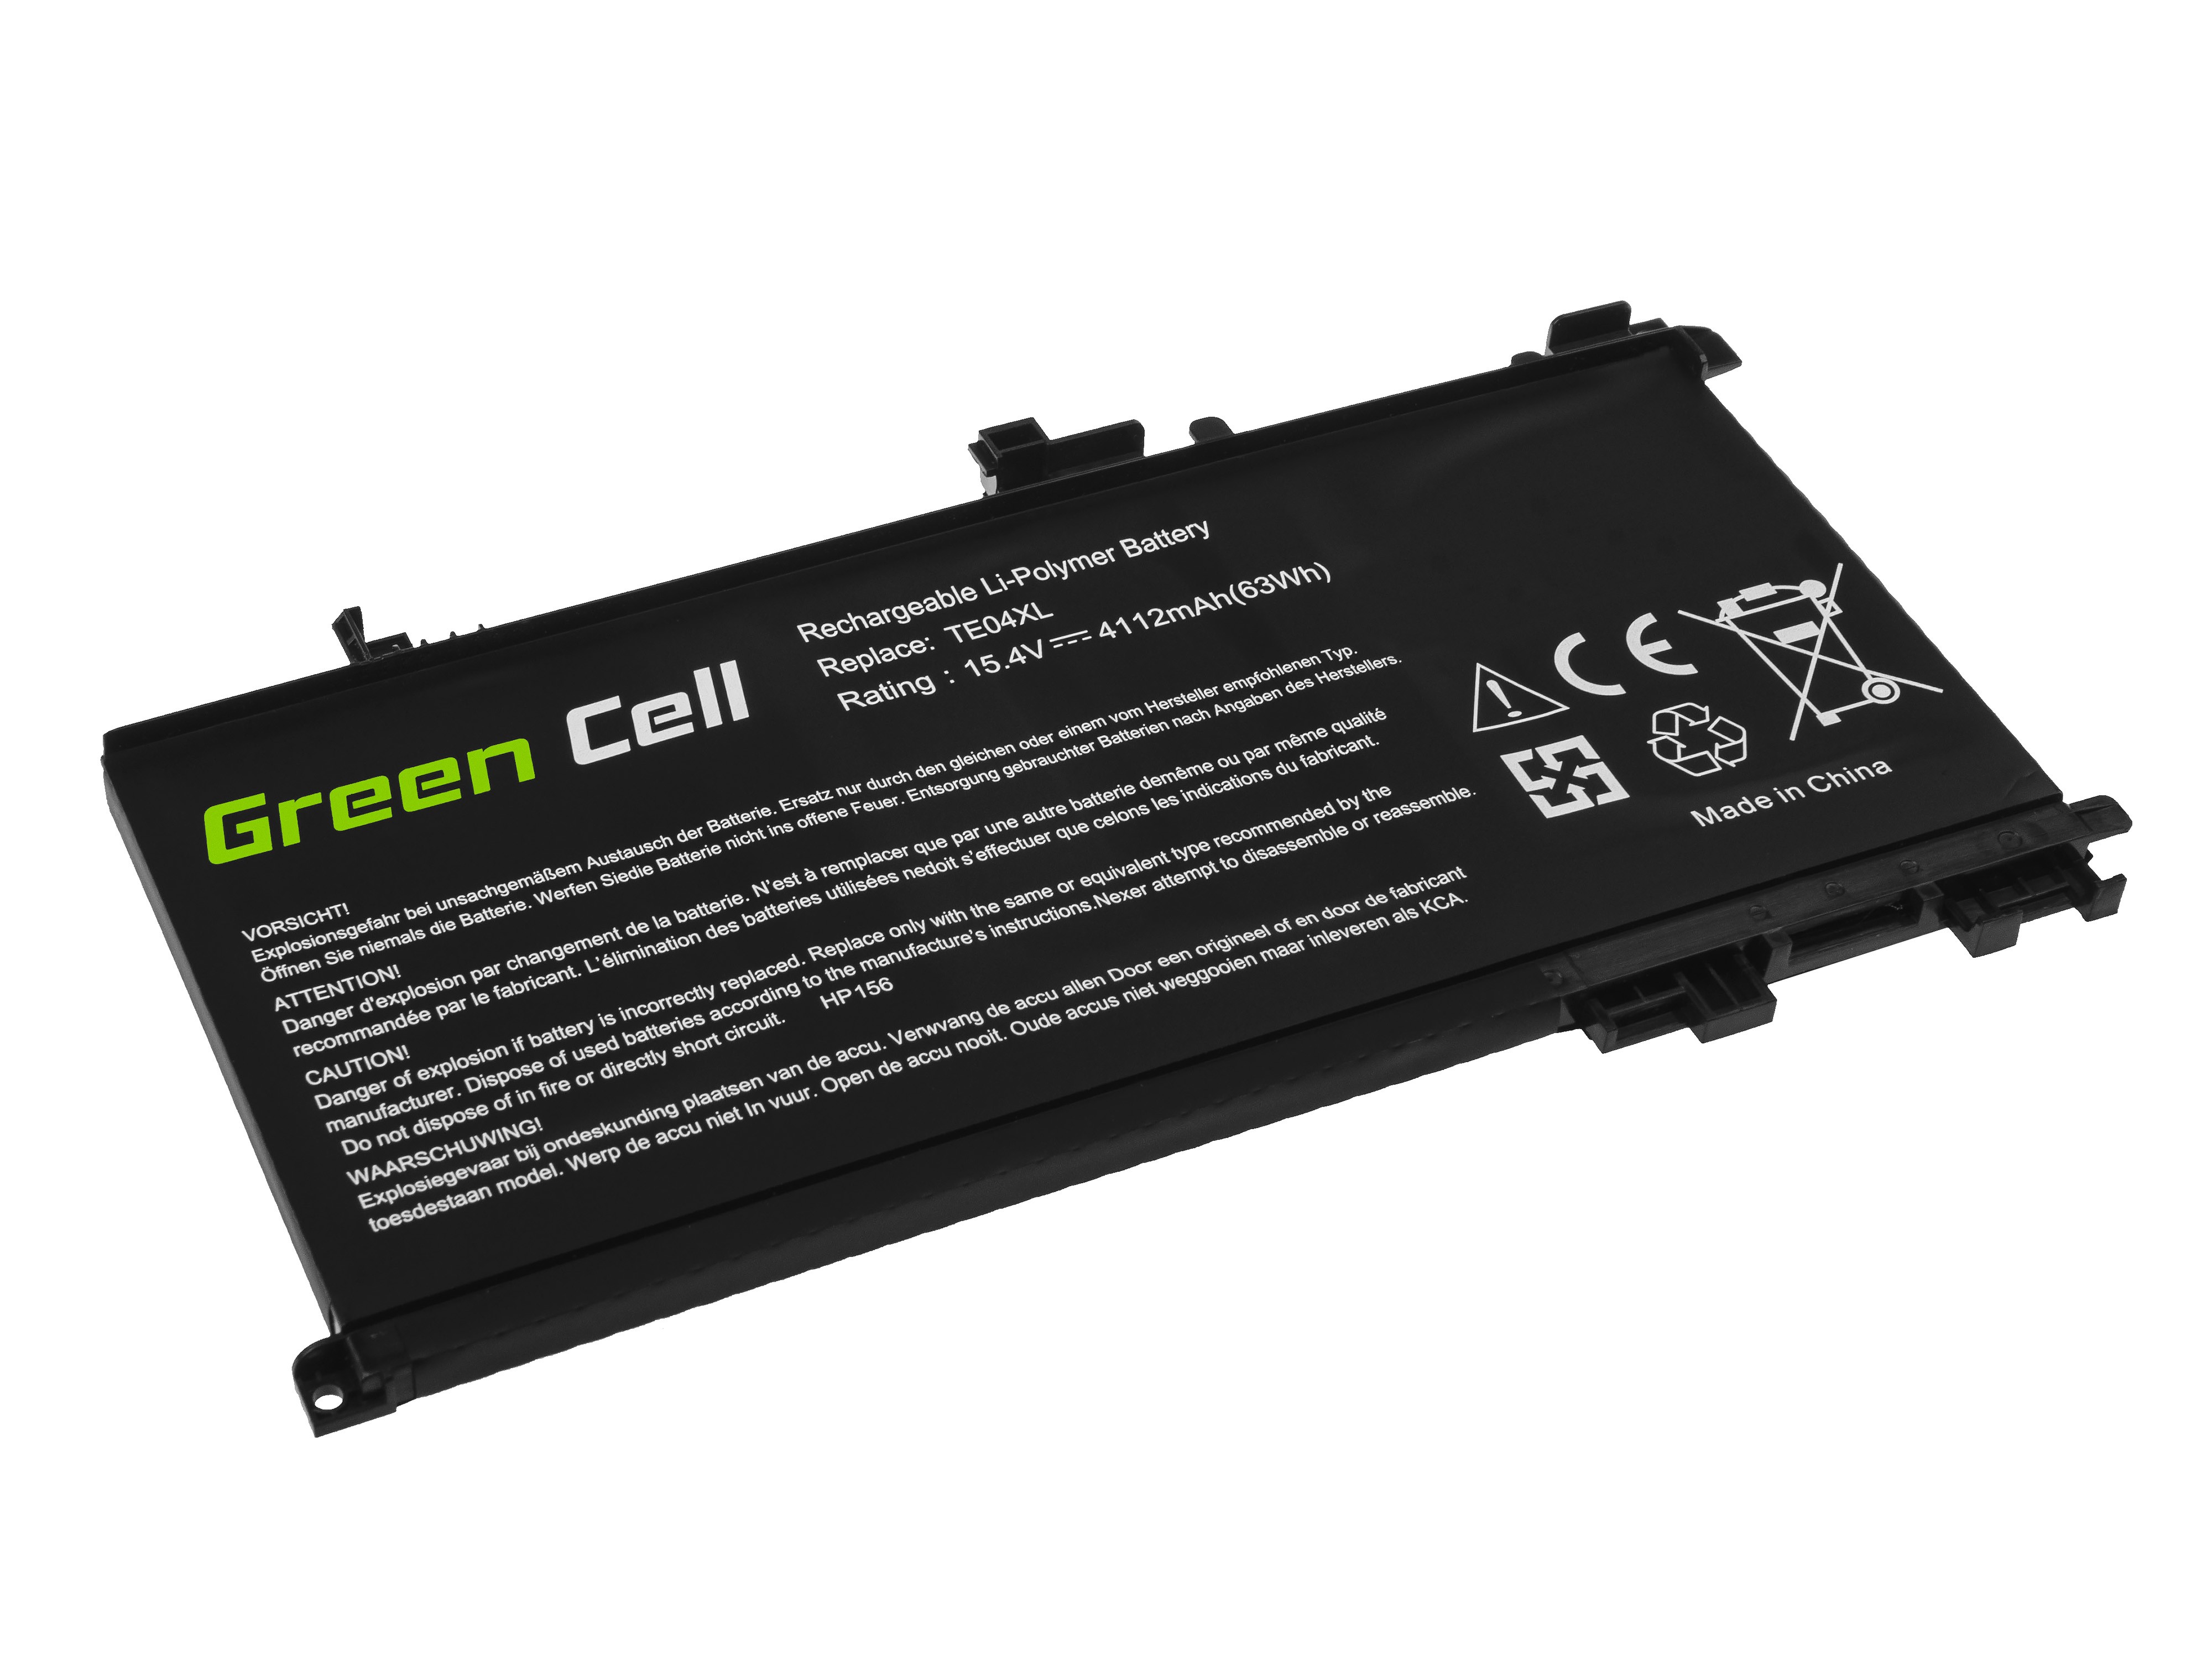 Batterij TE04XL voor HP Omen 15-AX 15-AX052NW 15-AX204NW 15-AX205NW 15-AX212NW 15-AX213NW Pavilion 15-BC050NW